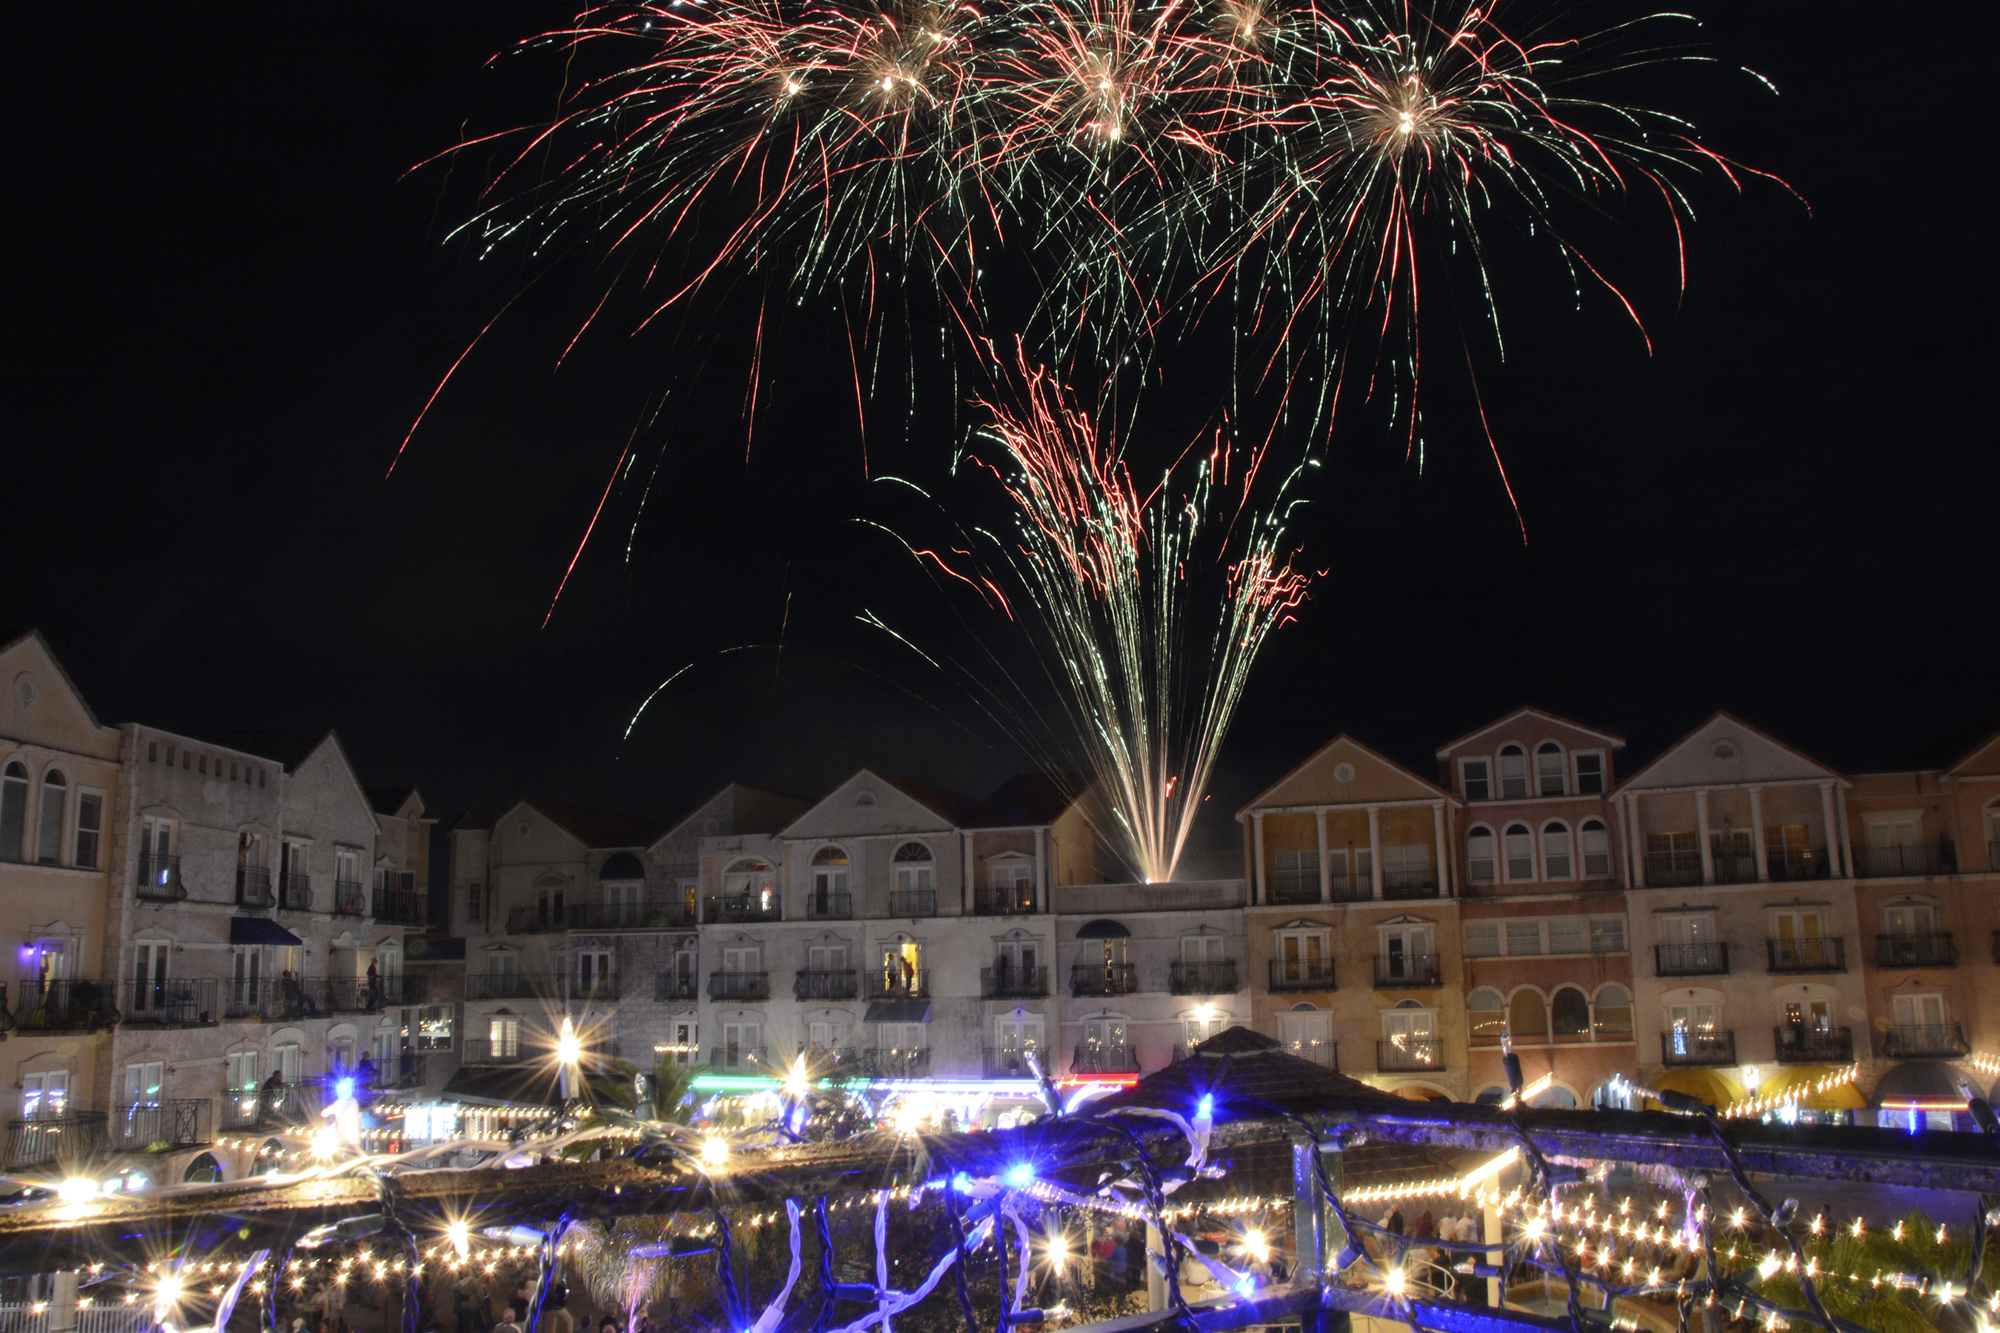 Residents were seen scattered among the balconies and onlookers ventured outside of the restaurants to gawk at the beautiful display of fireworks above the village. Photo by Anastasia Pagello